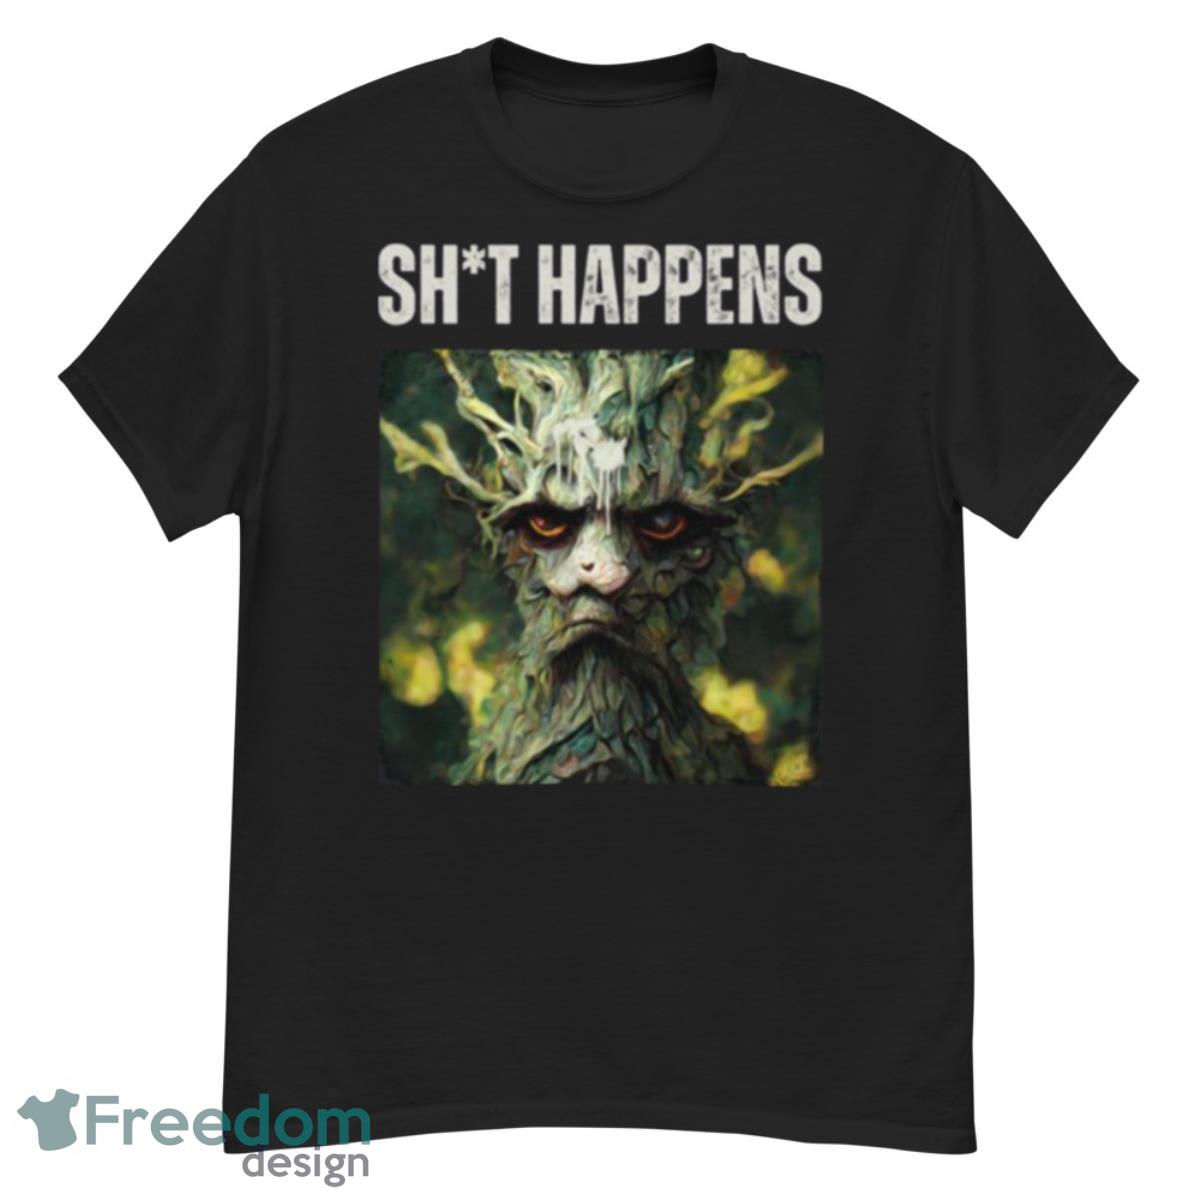 Sht Happens Angry Ent The Rings Of Power shirt - G500 Men’s Classic T-Shirt